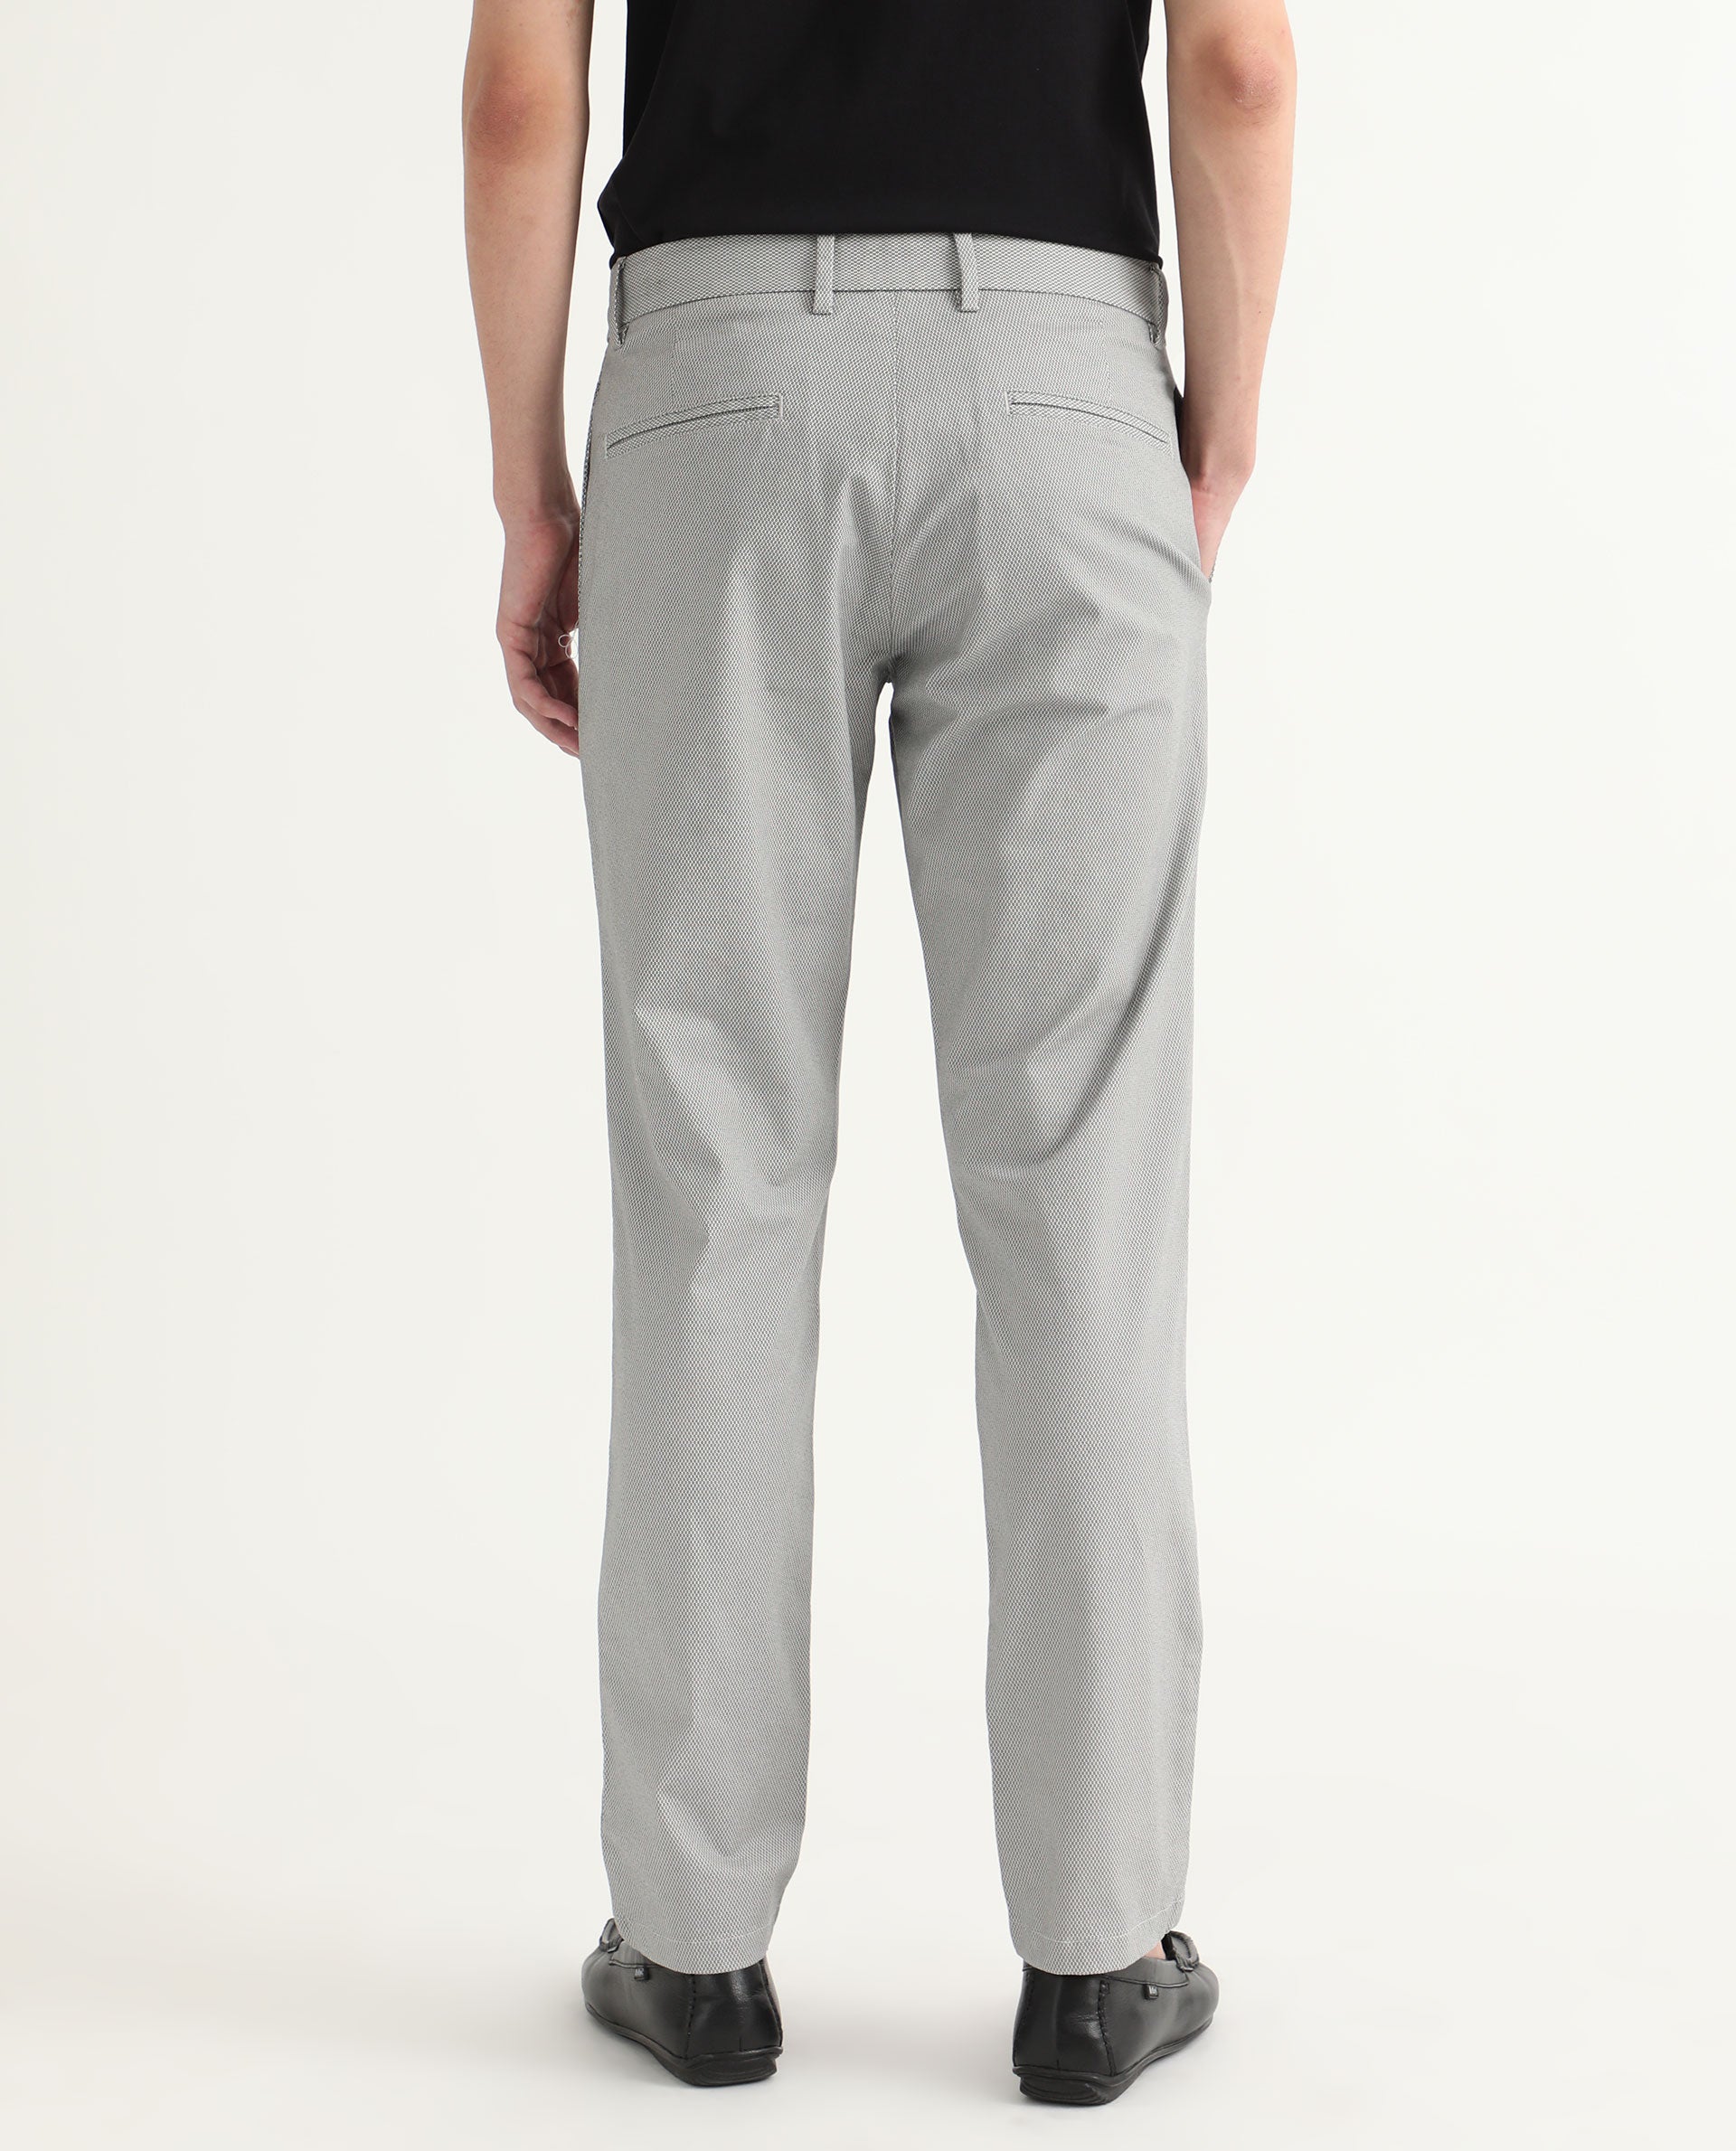 Buy WES Formals Grey Houndstooth Slim Tapered Fit Trousers from Westside